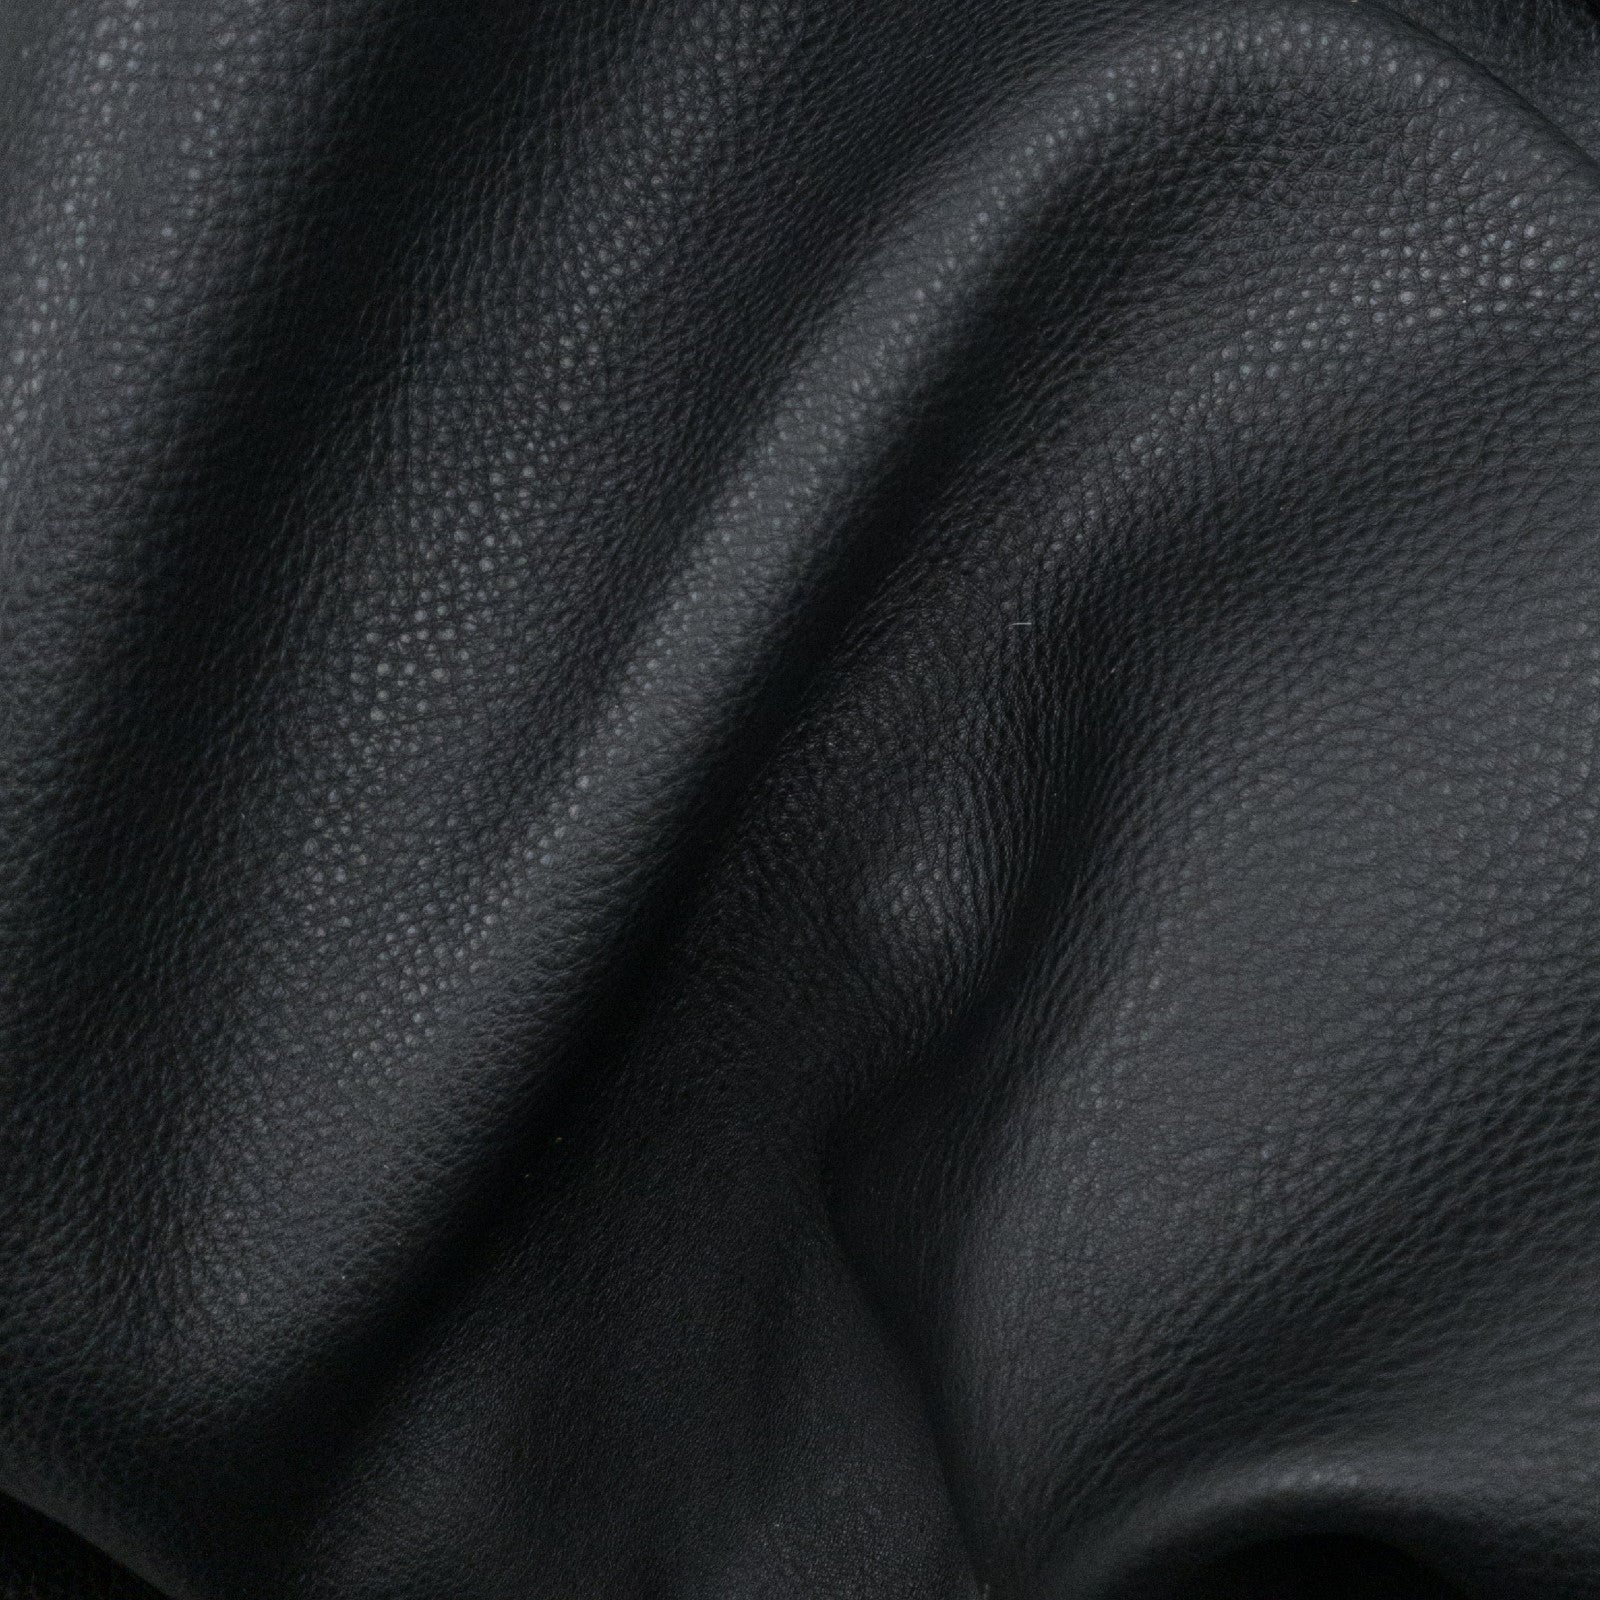 Greys and Black, 2-4 oz, 3-10 Sq Ft, Upholstery Cow Project Pieces, Black 1 (3-4 oz) / 7-10 Sq ft | The Leather Guy